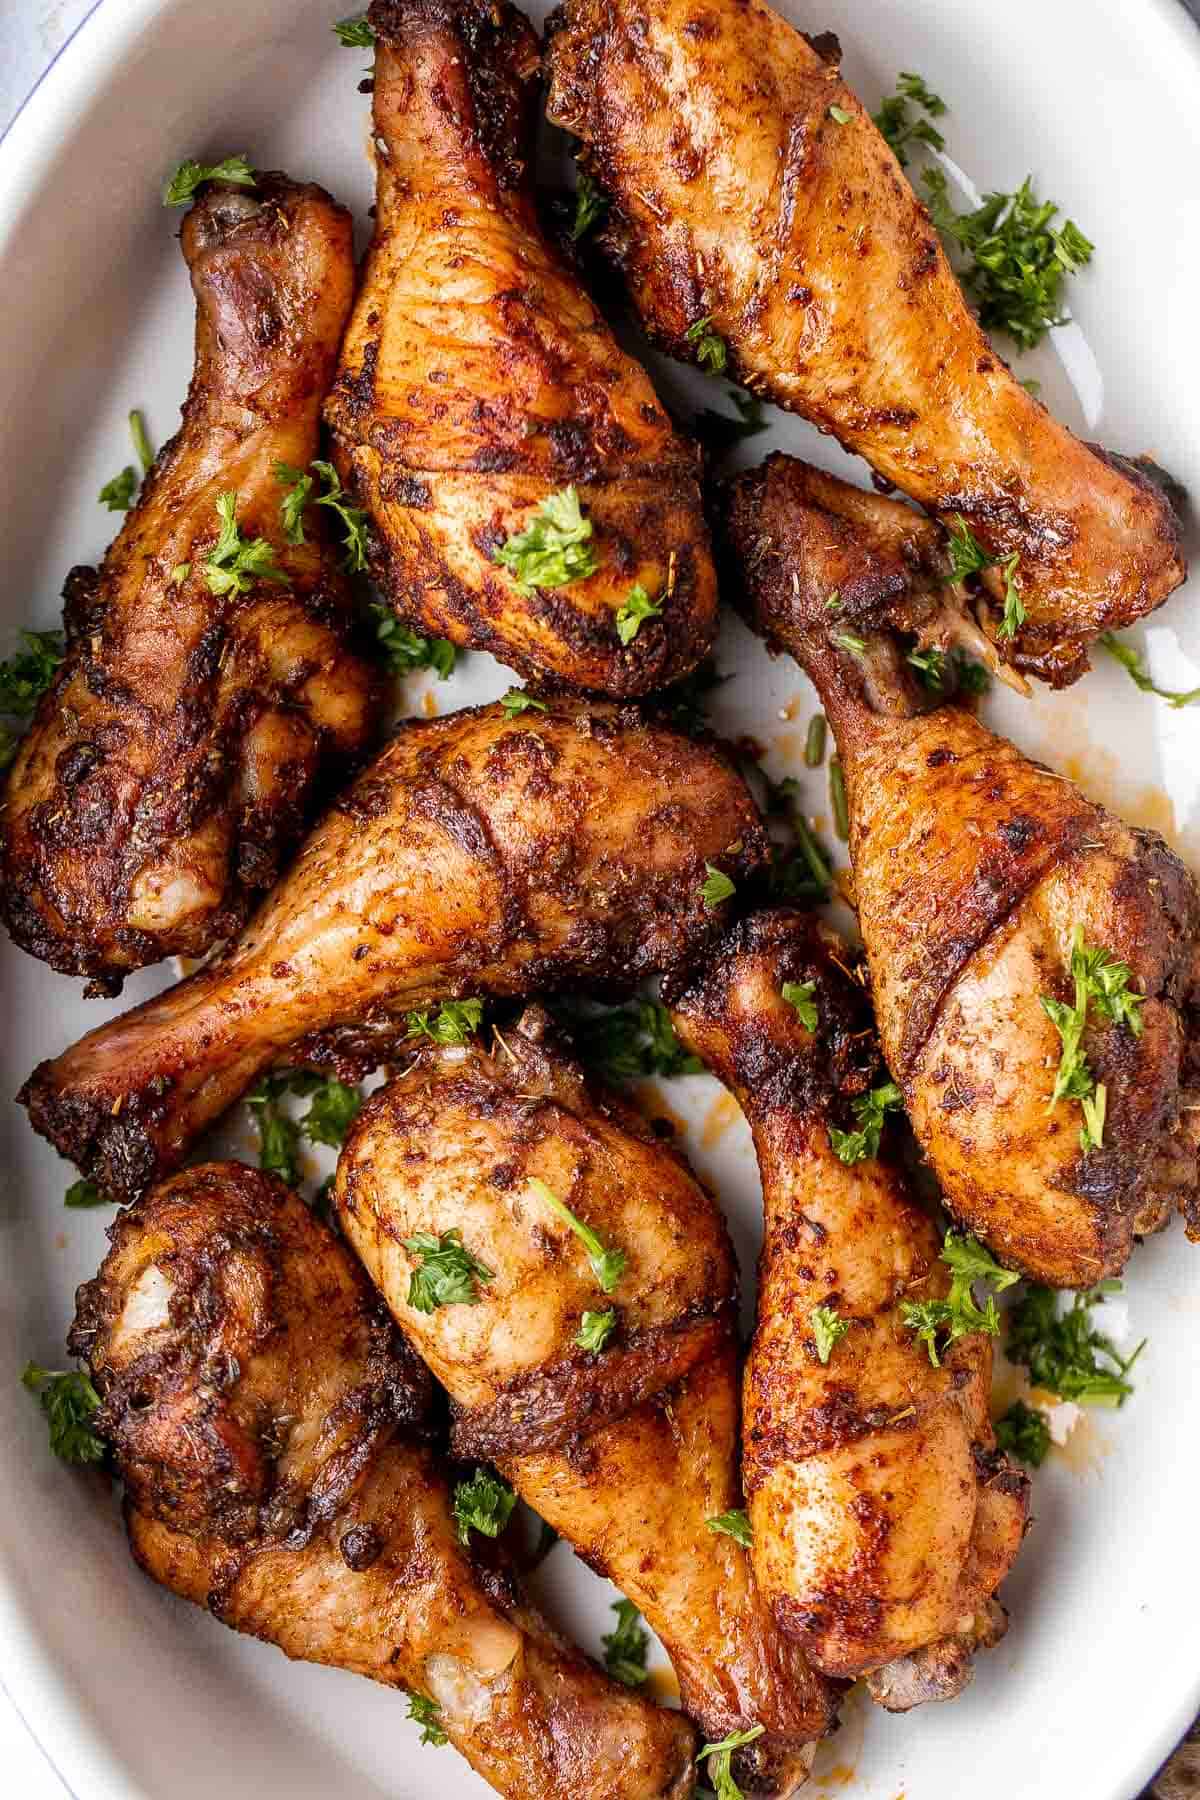 baked chicken drumsticks in a white dish topped with chopped fresh parsley - one of the recipes for this week's healthy weekly meal plan